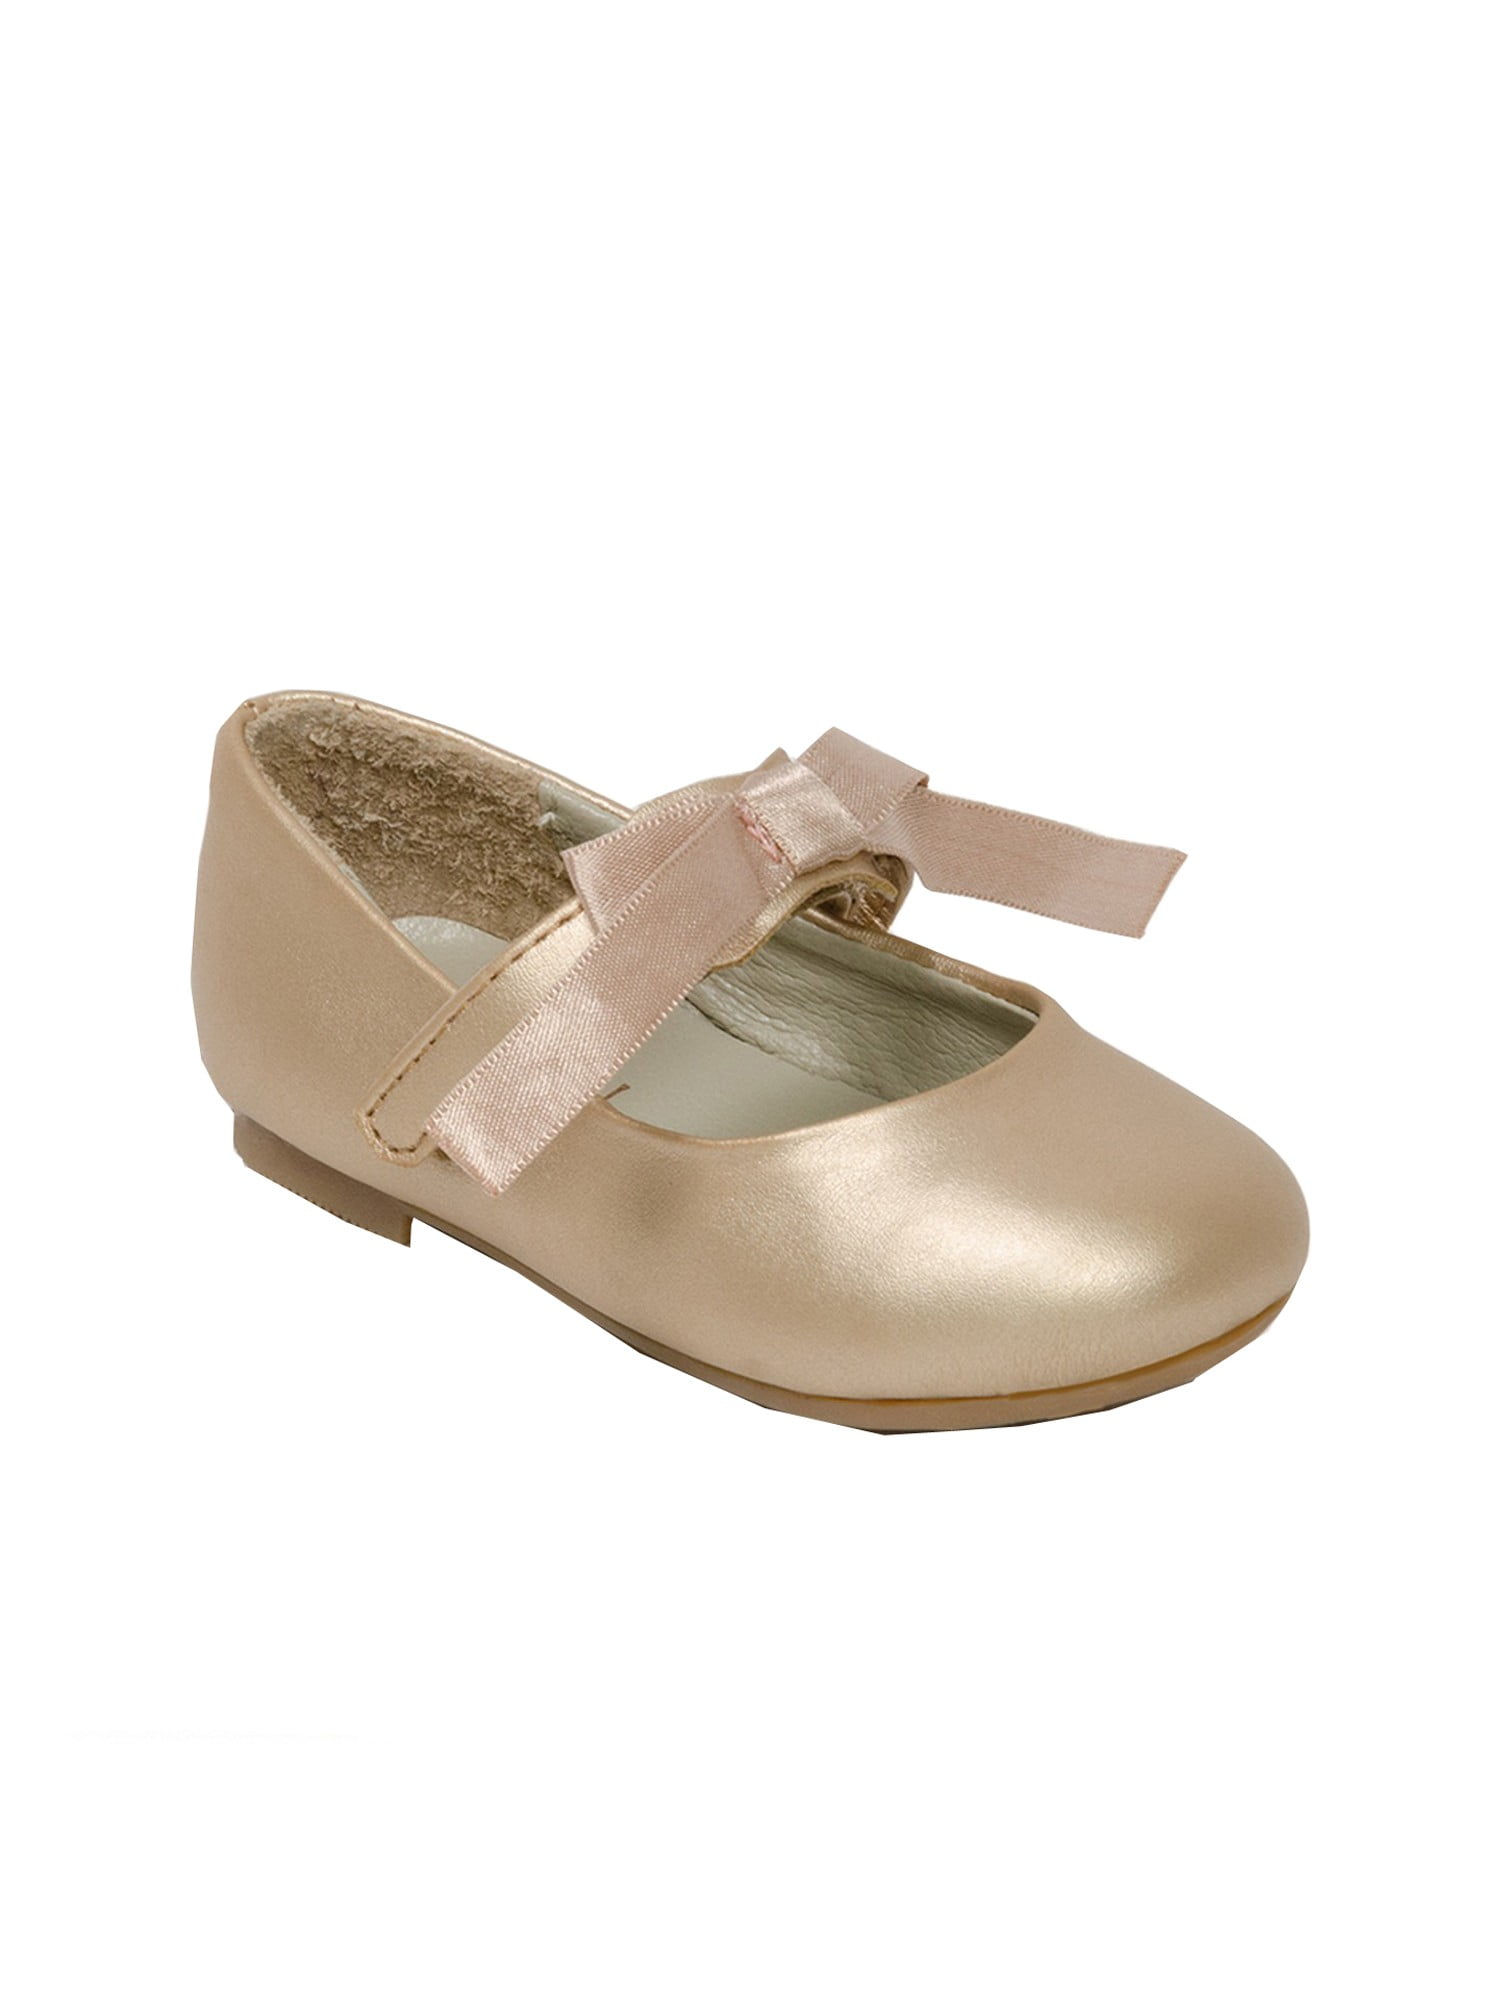 LAmour Girls White Leather Removable Satin Strap Flats 11-4 Kids 